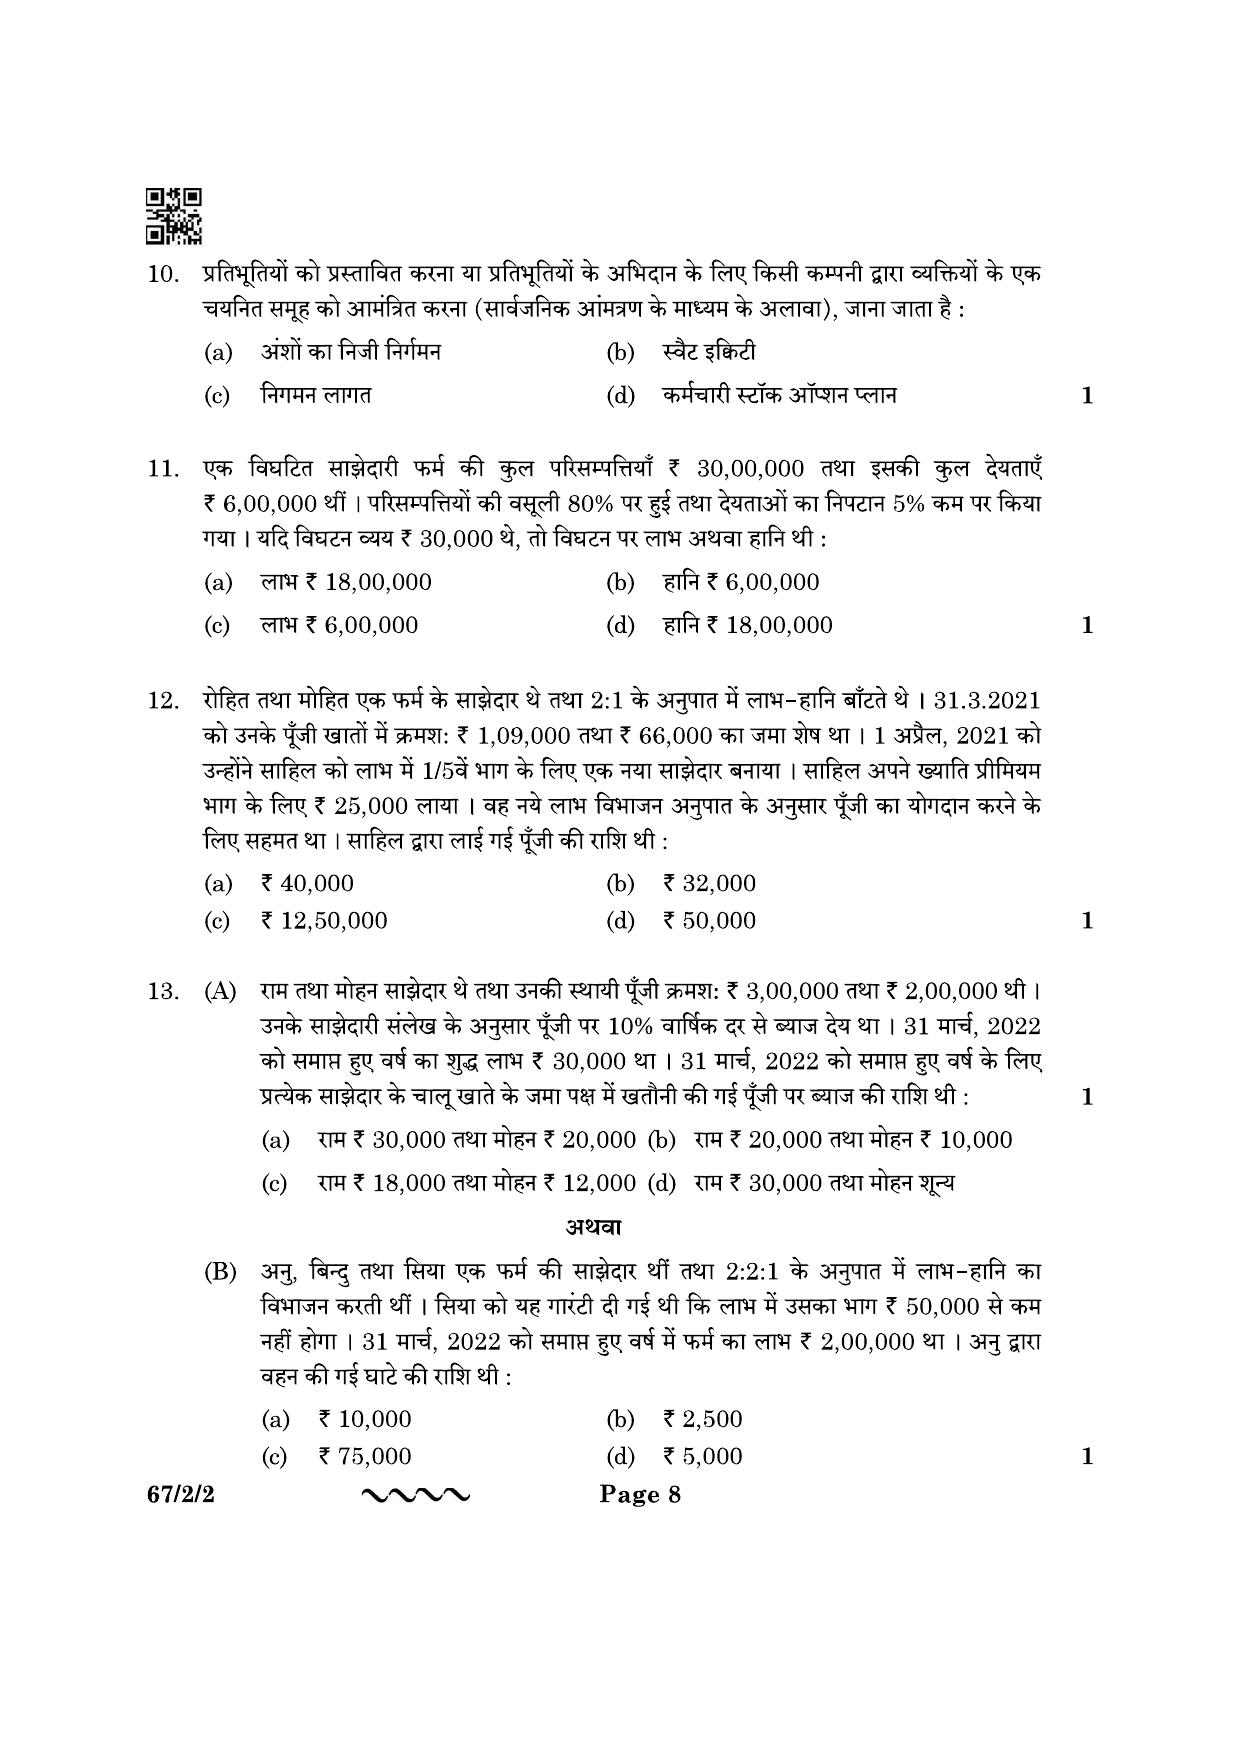 CBSE Class 12 67-2-2 Accountancy 2023 Question Paper - Page 8